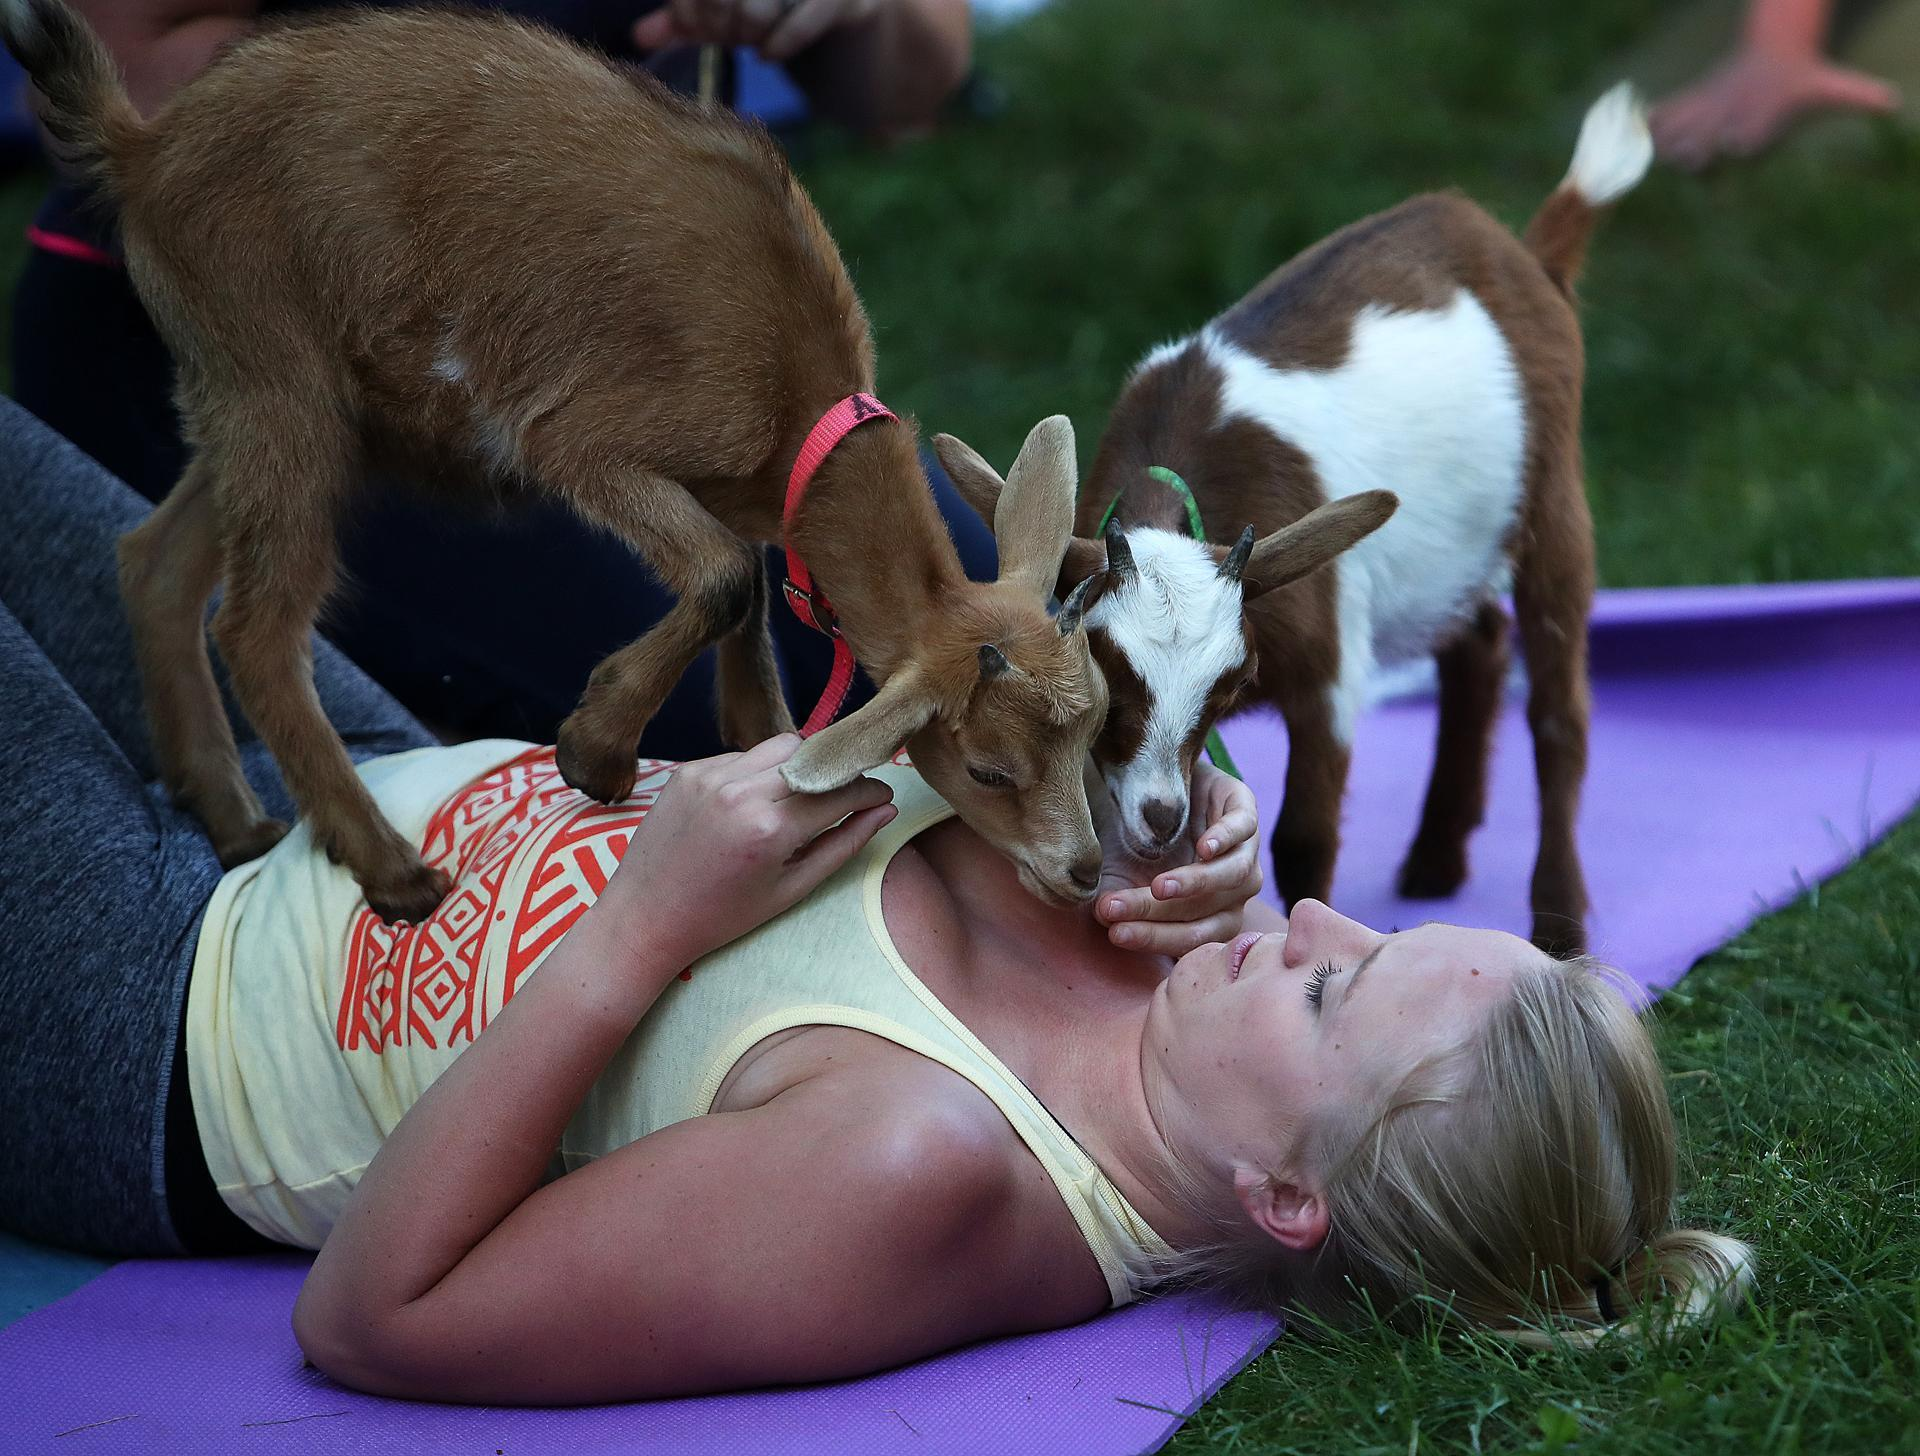 Cats, goats, and downward-facing dogs. The options are endless for yoga with a twist.